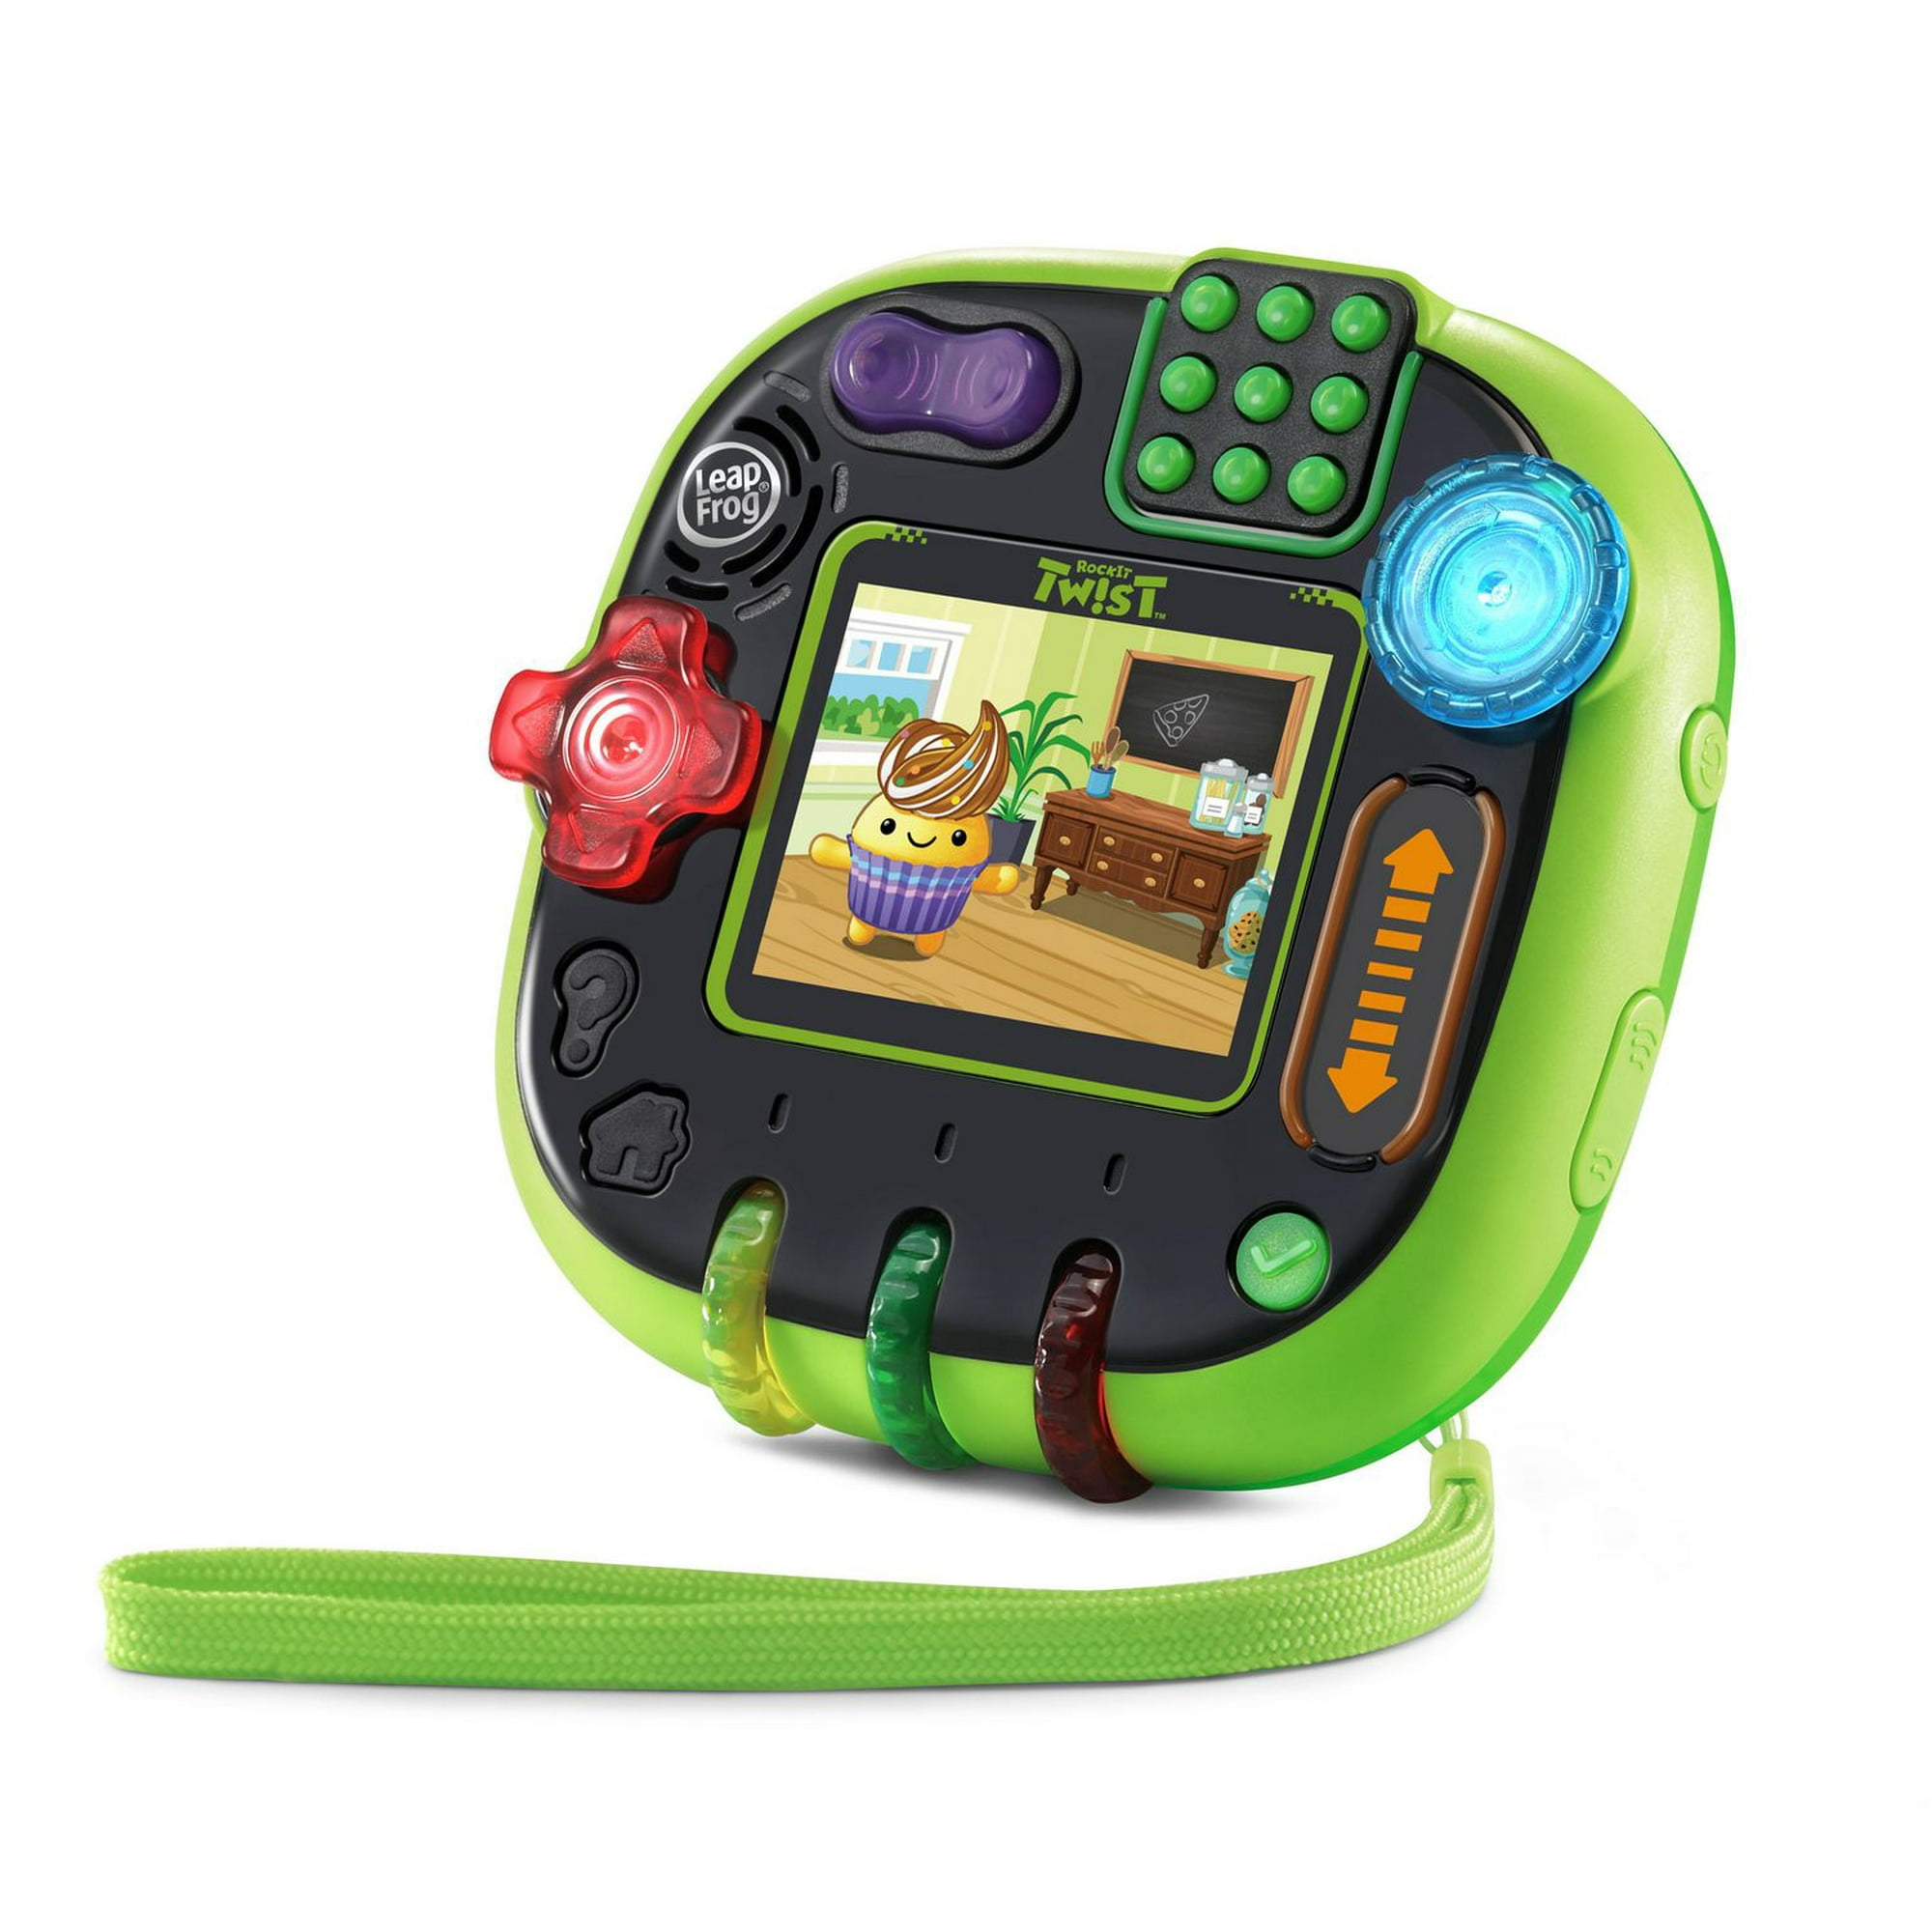 Leapfrog Turbo Twist Spelling Educational Game Working Tested Home School -   Canada